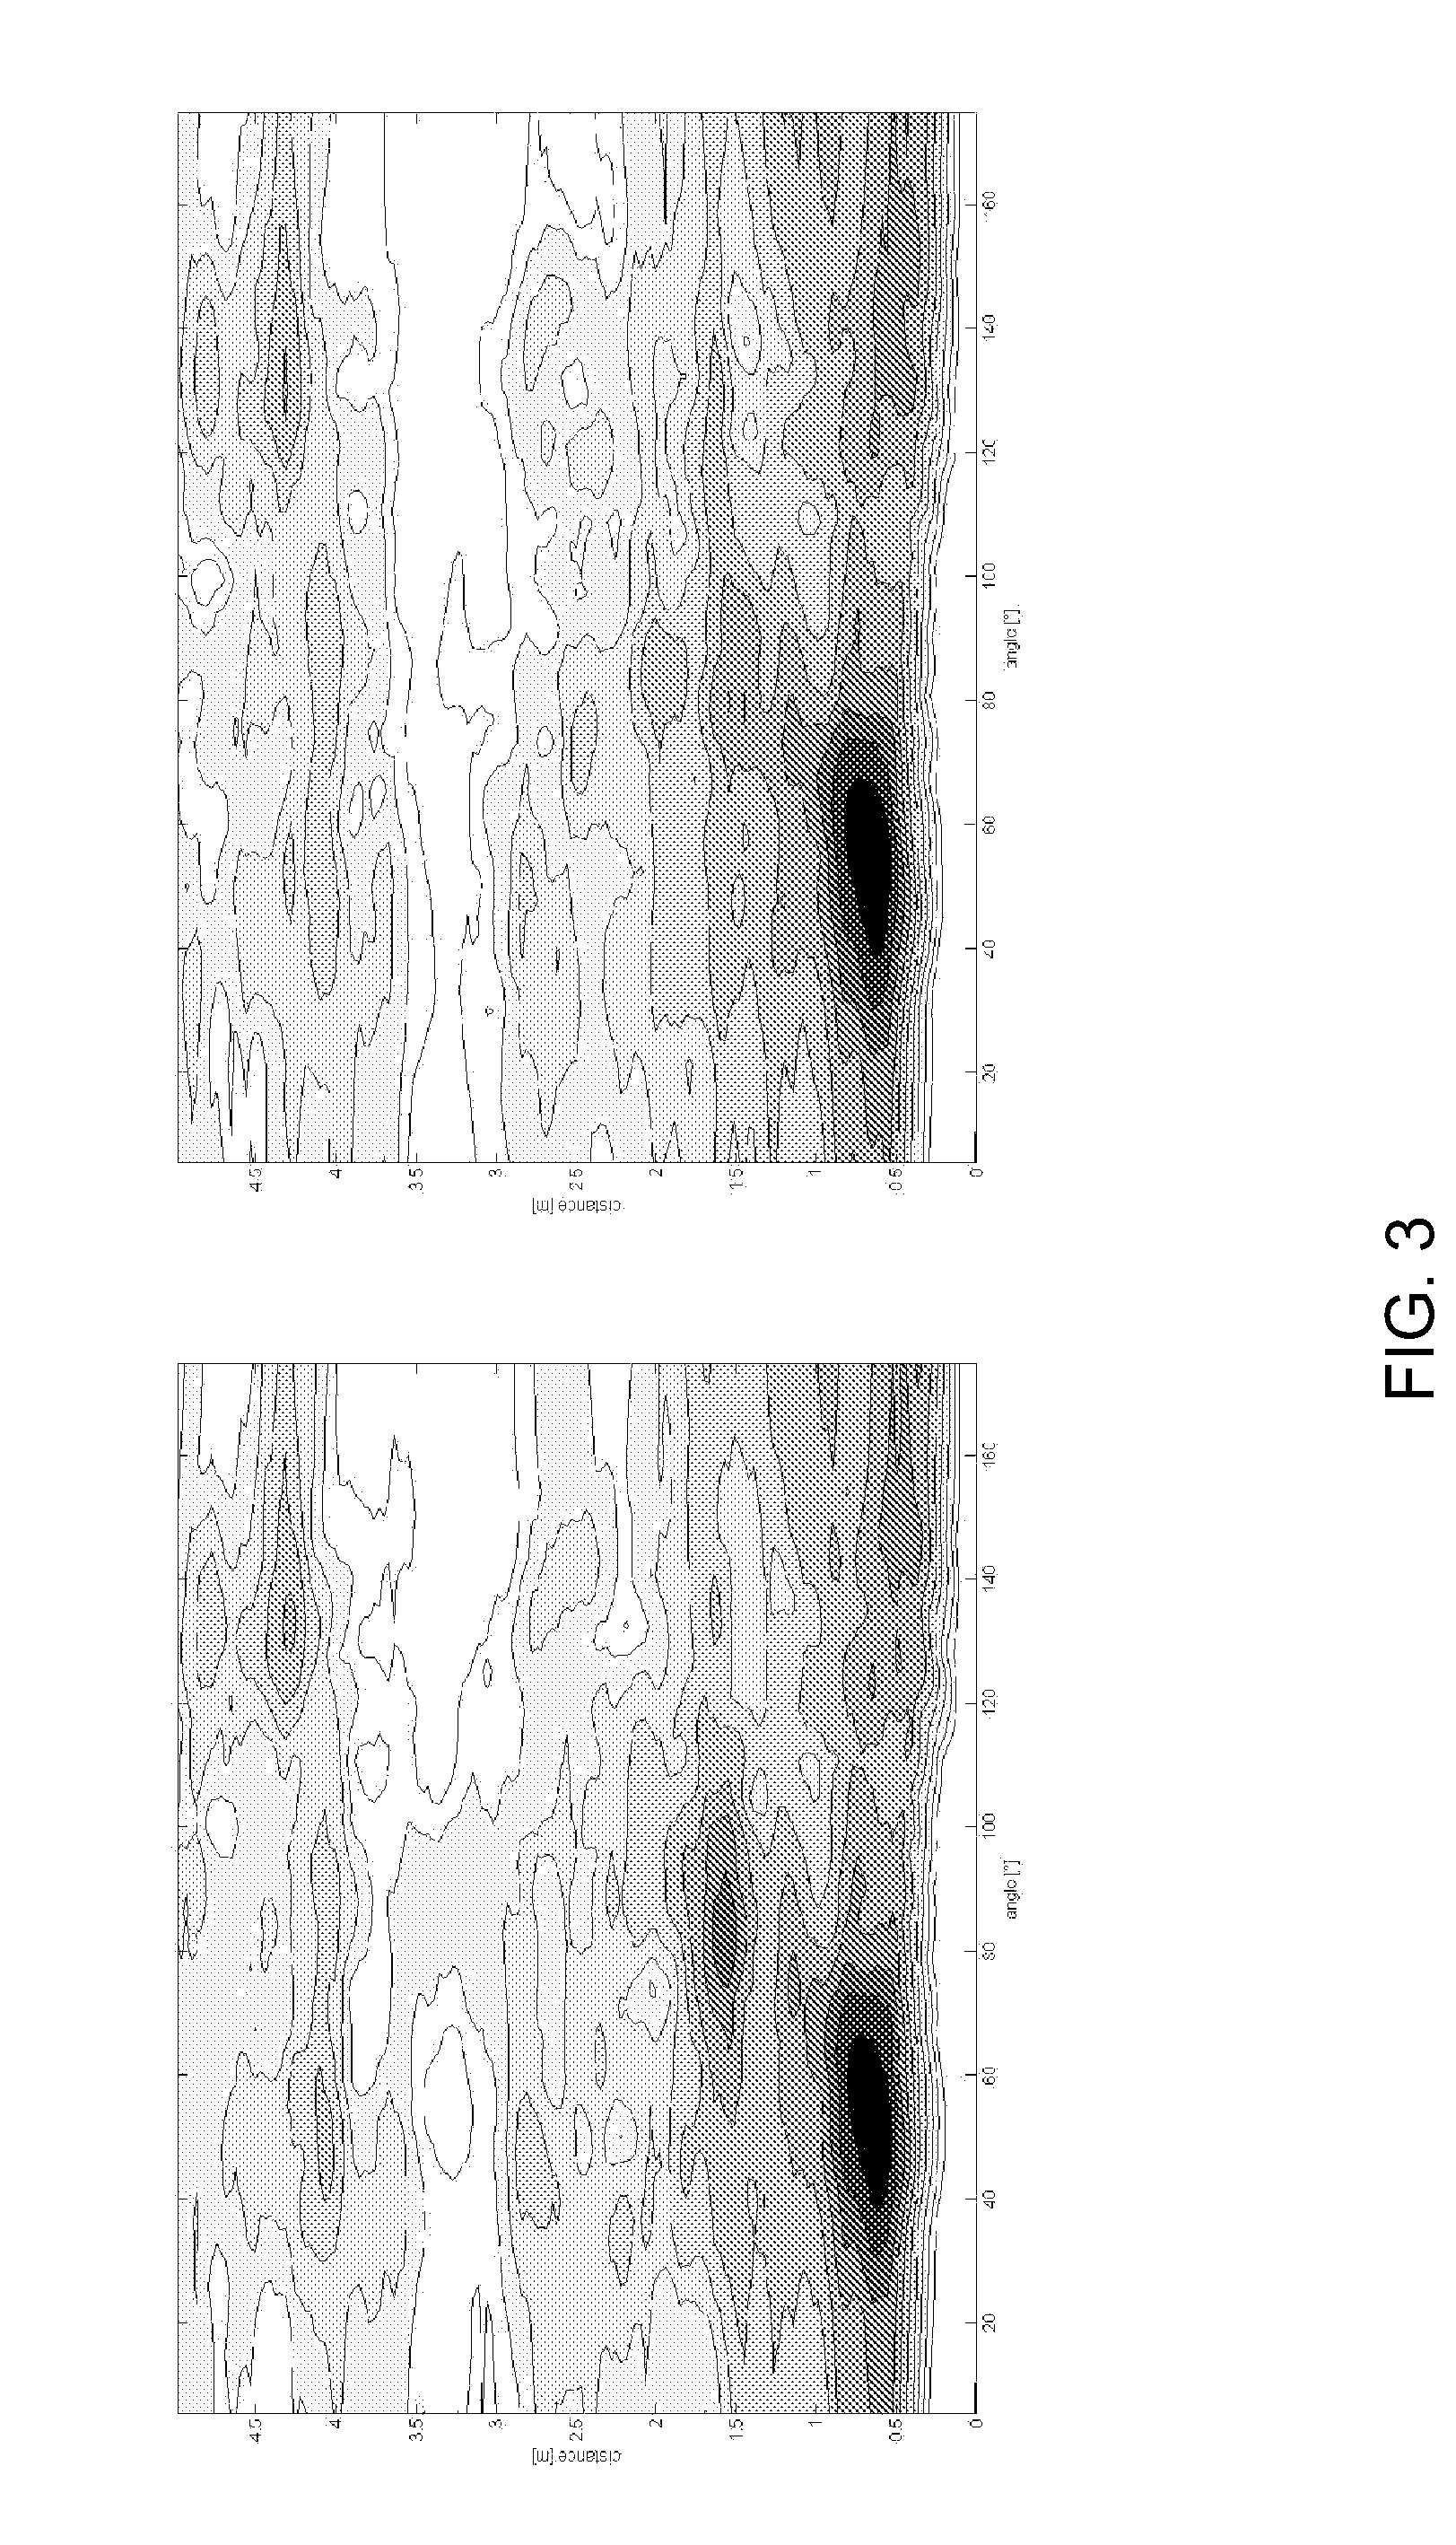 Acoustic localization of a speaker